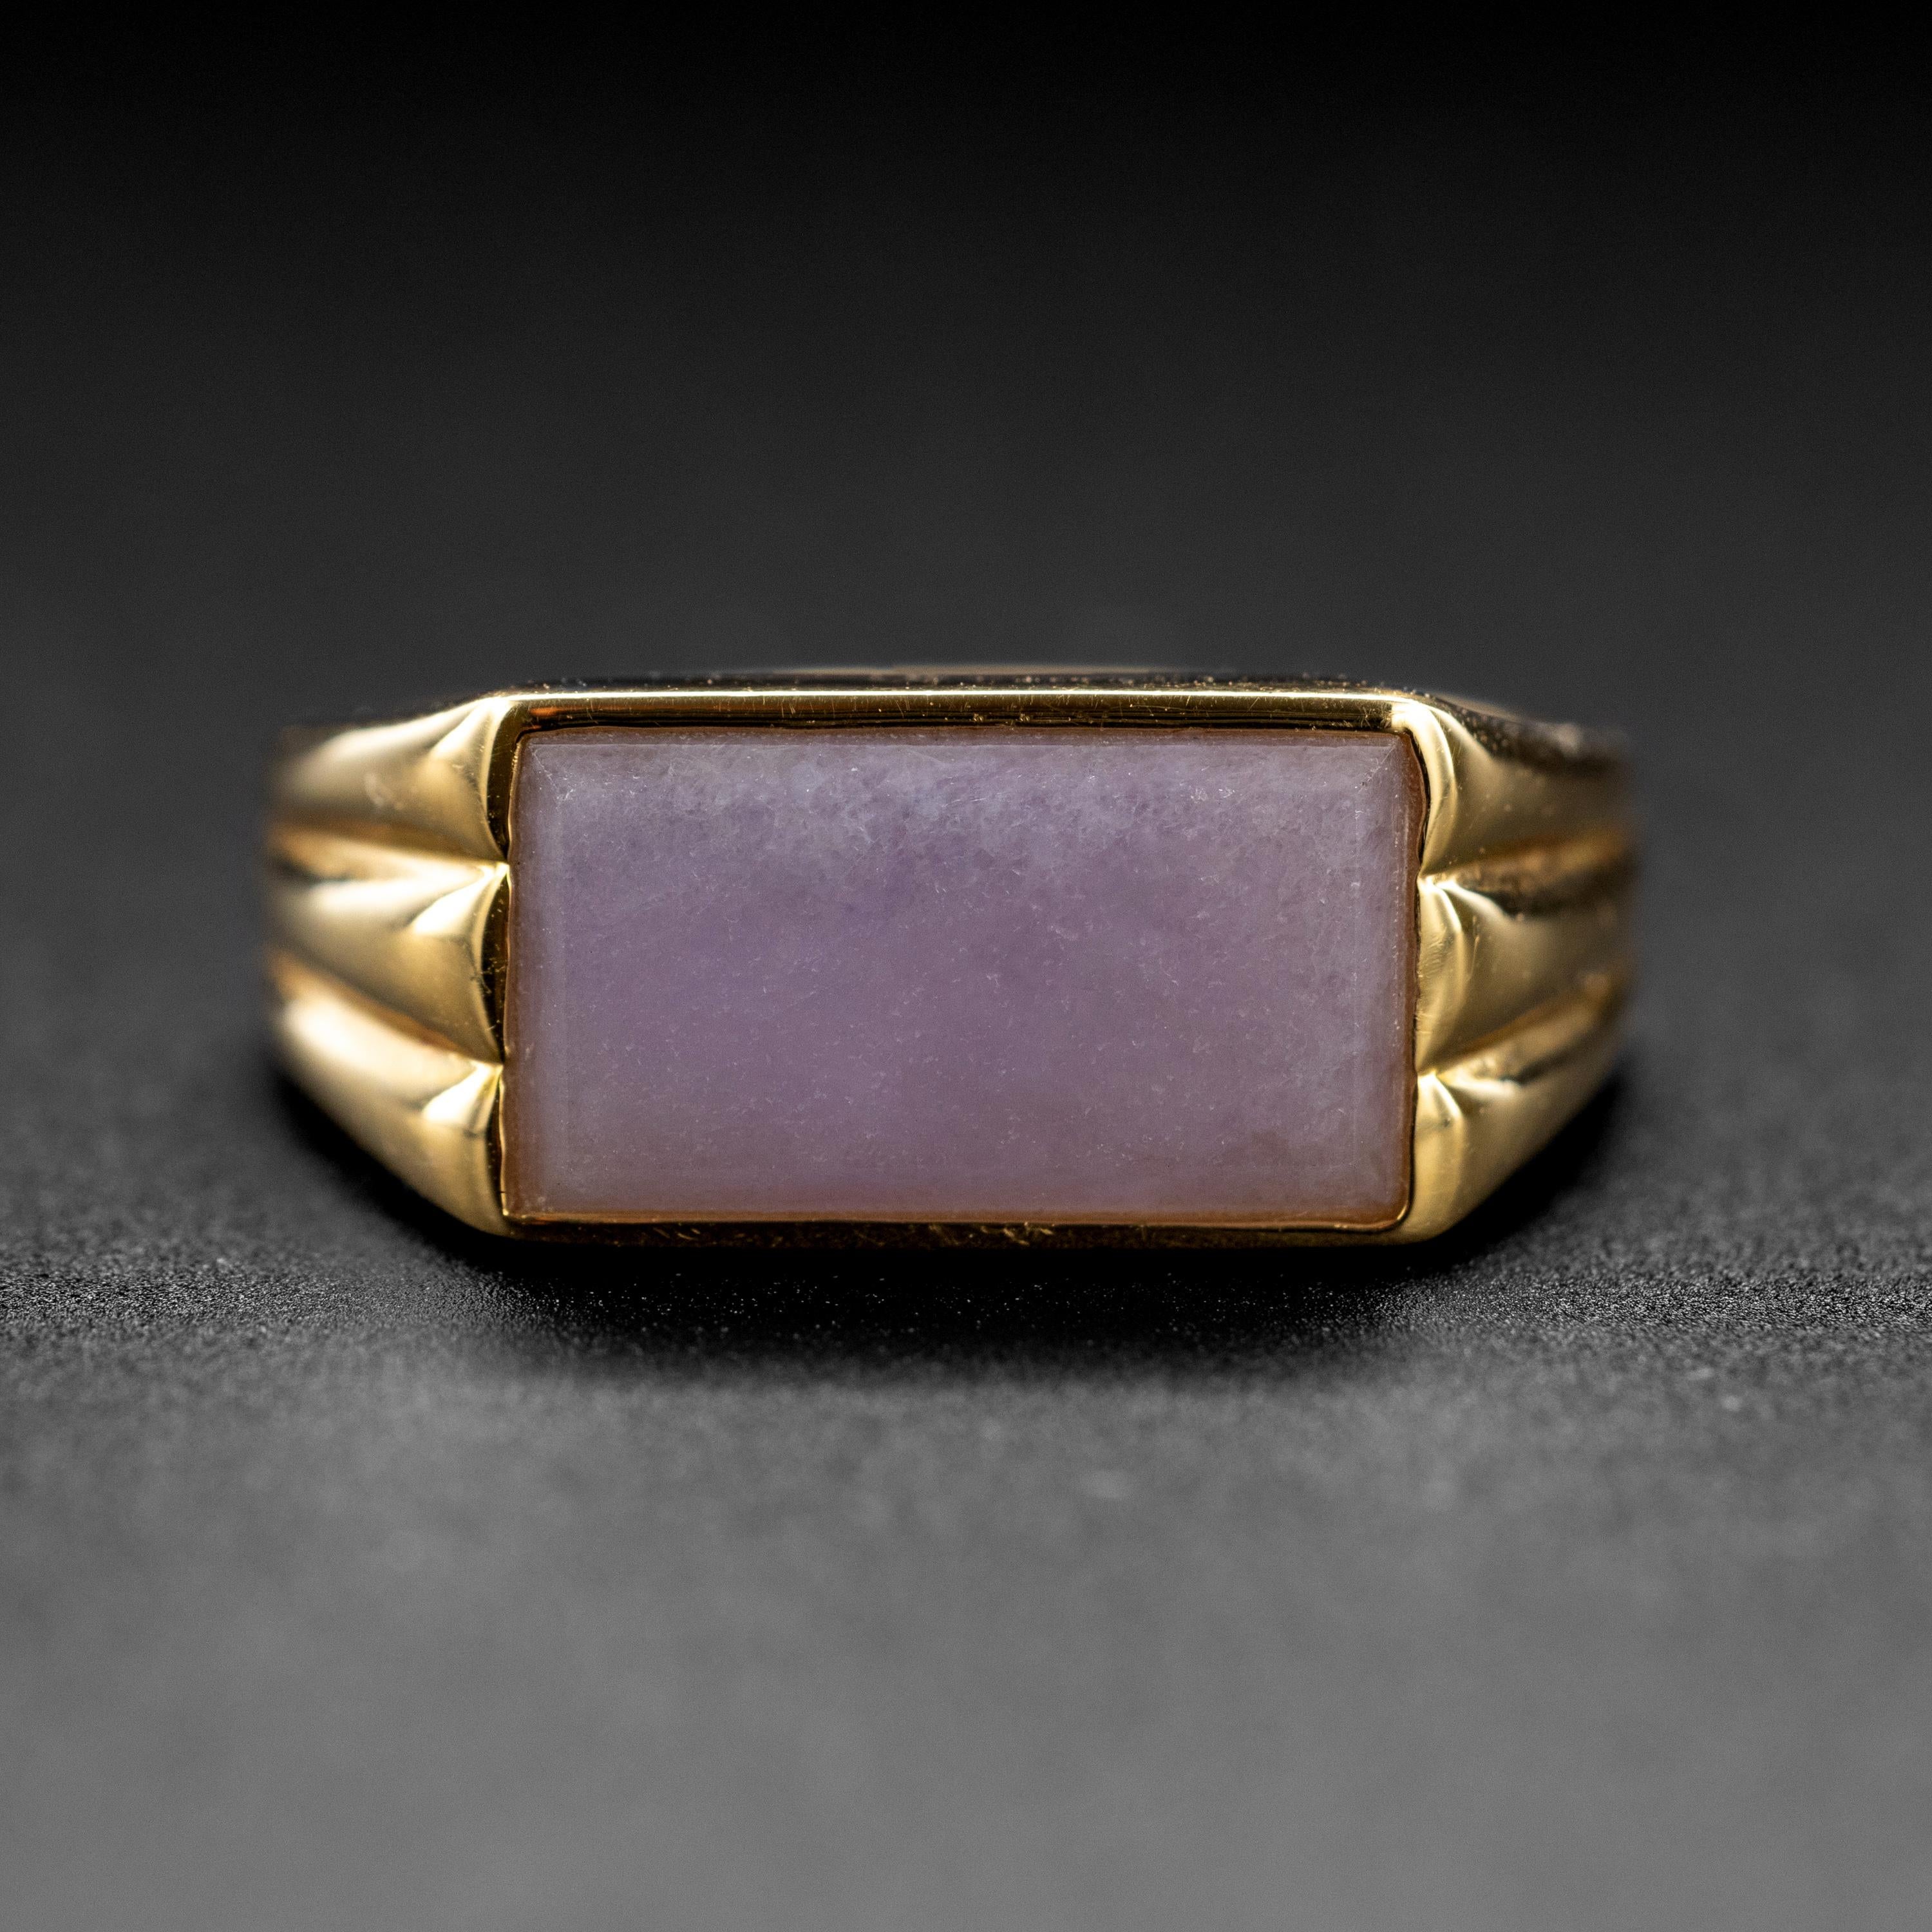 Featuring a 12mm x 6.7mm rectangular tablet of natural, untreated lavender jadeite jade, this sleek 14K yellow gold ring is a classic, understated ring for a man or a woman. Created in the 2000s but never worn, the ring is new. The ring weighs 5